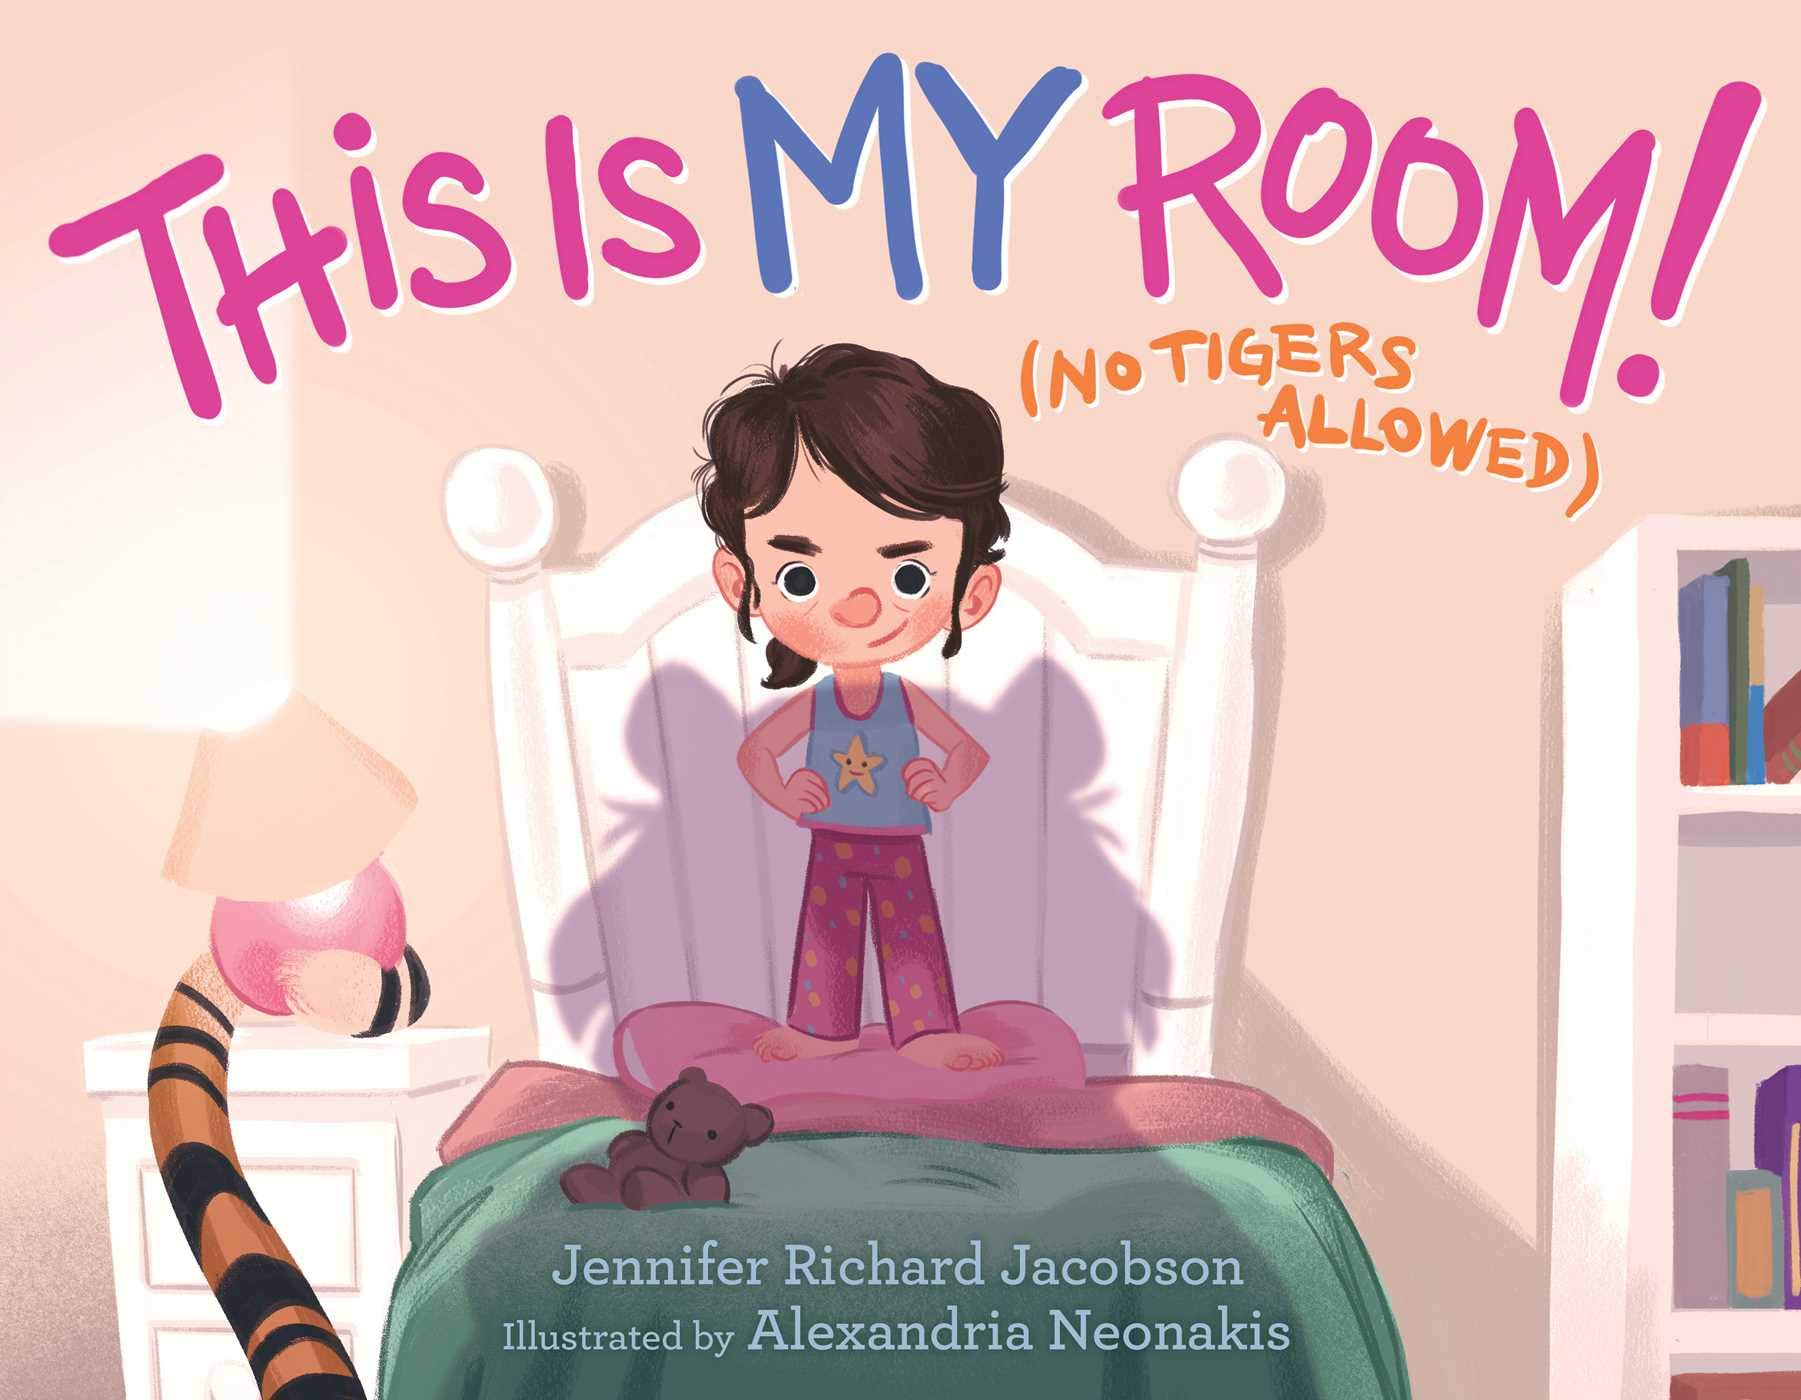 This Is My Room!: (No Tigers Allowed) by Jennifer Richard Jacobson